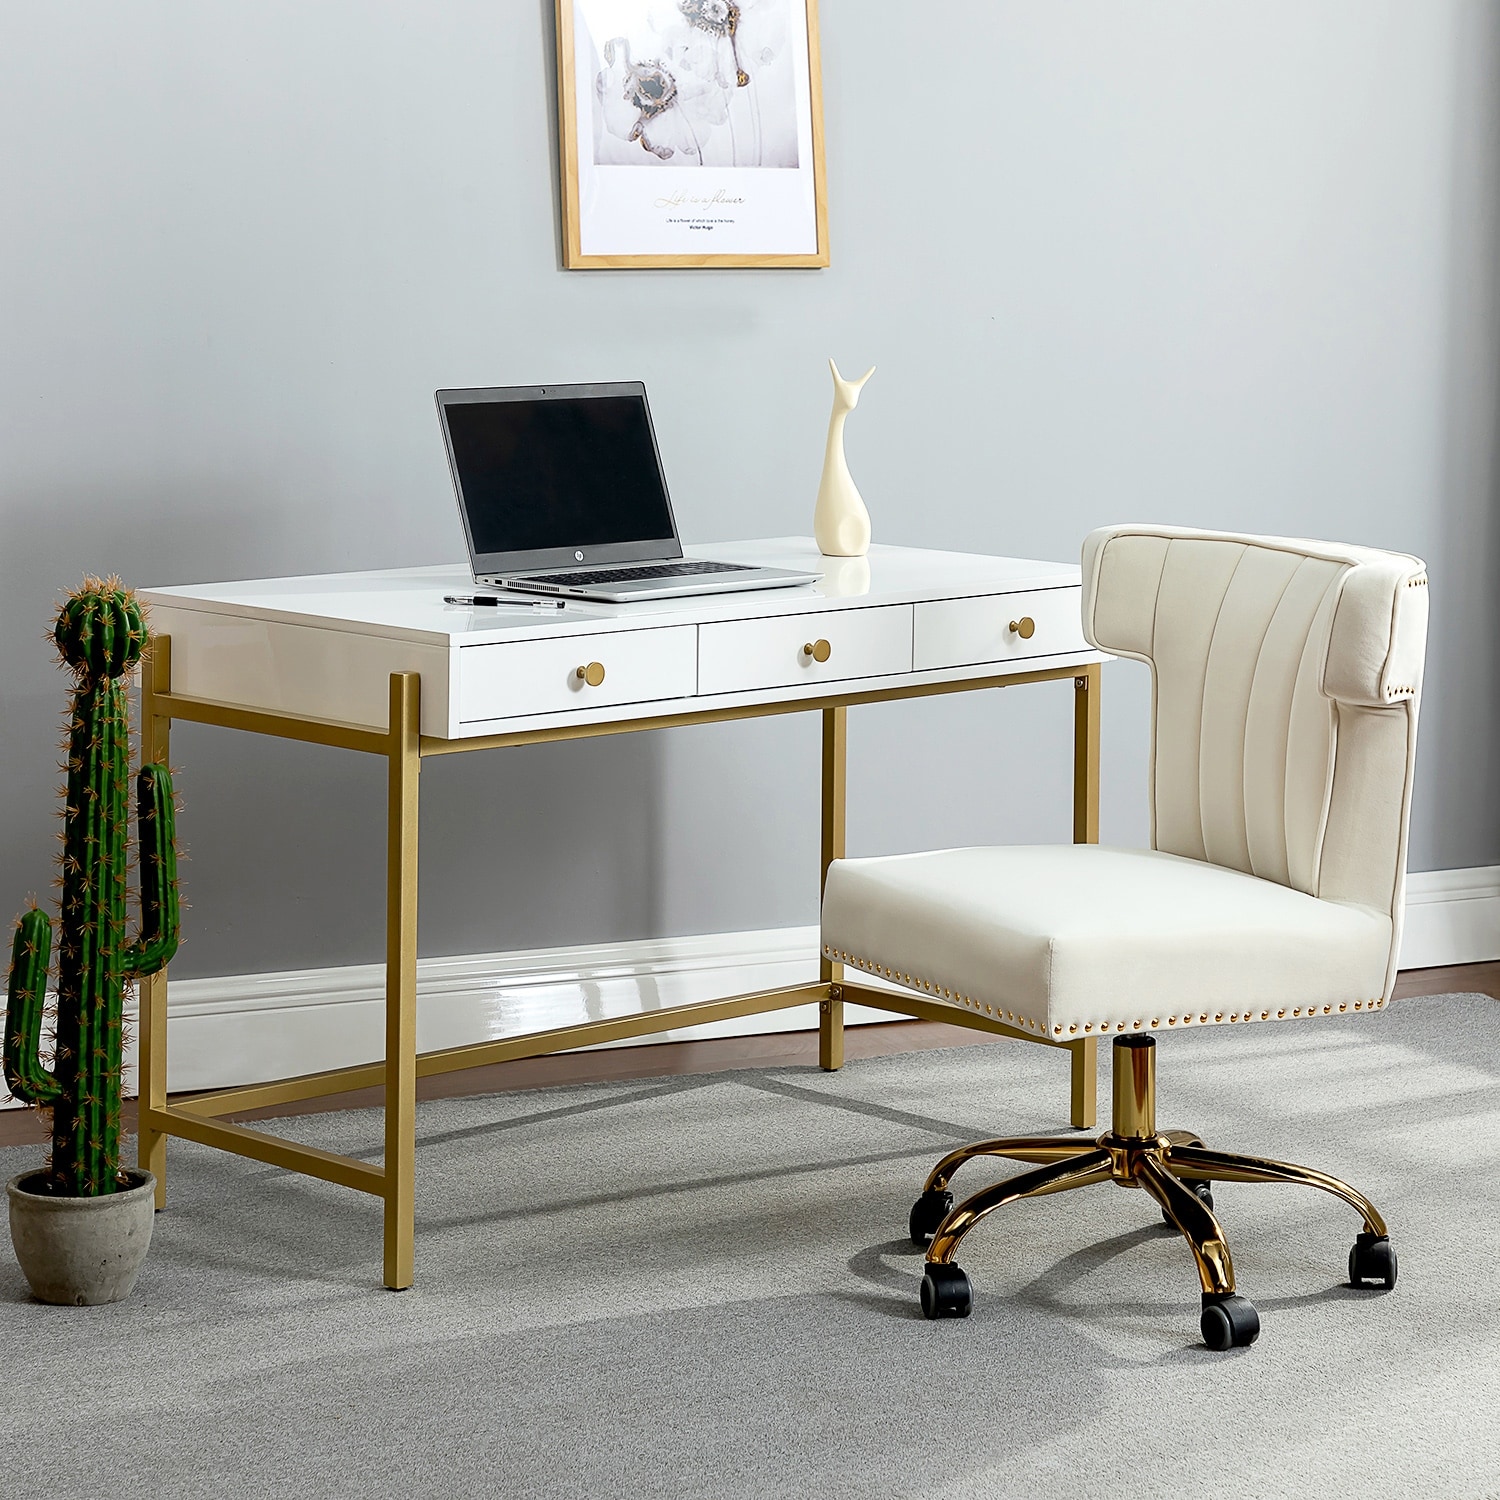 https://ak1.ostkcdn.com/images/products/is/images/direct/d78de9f2b58b141d1cb330e1f1caaeb64d8eeb3c/Saliva-Writing-Desk-with-Golden-Base-for-Office.jpg